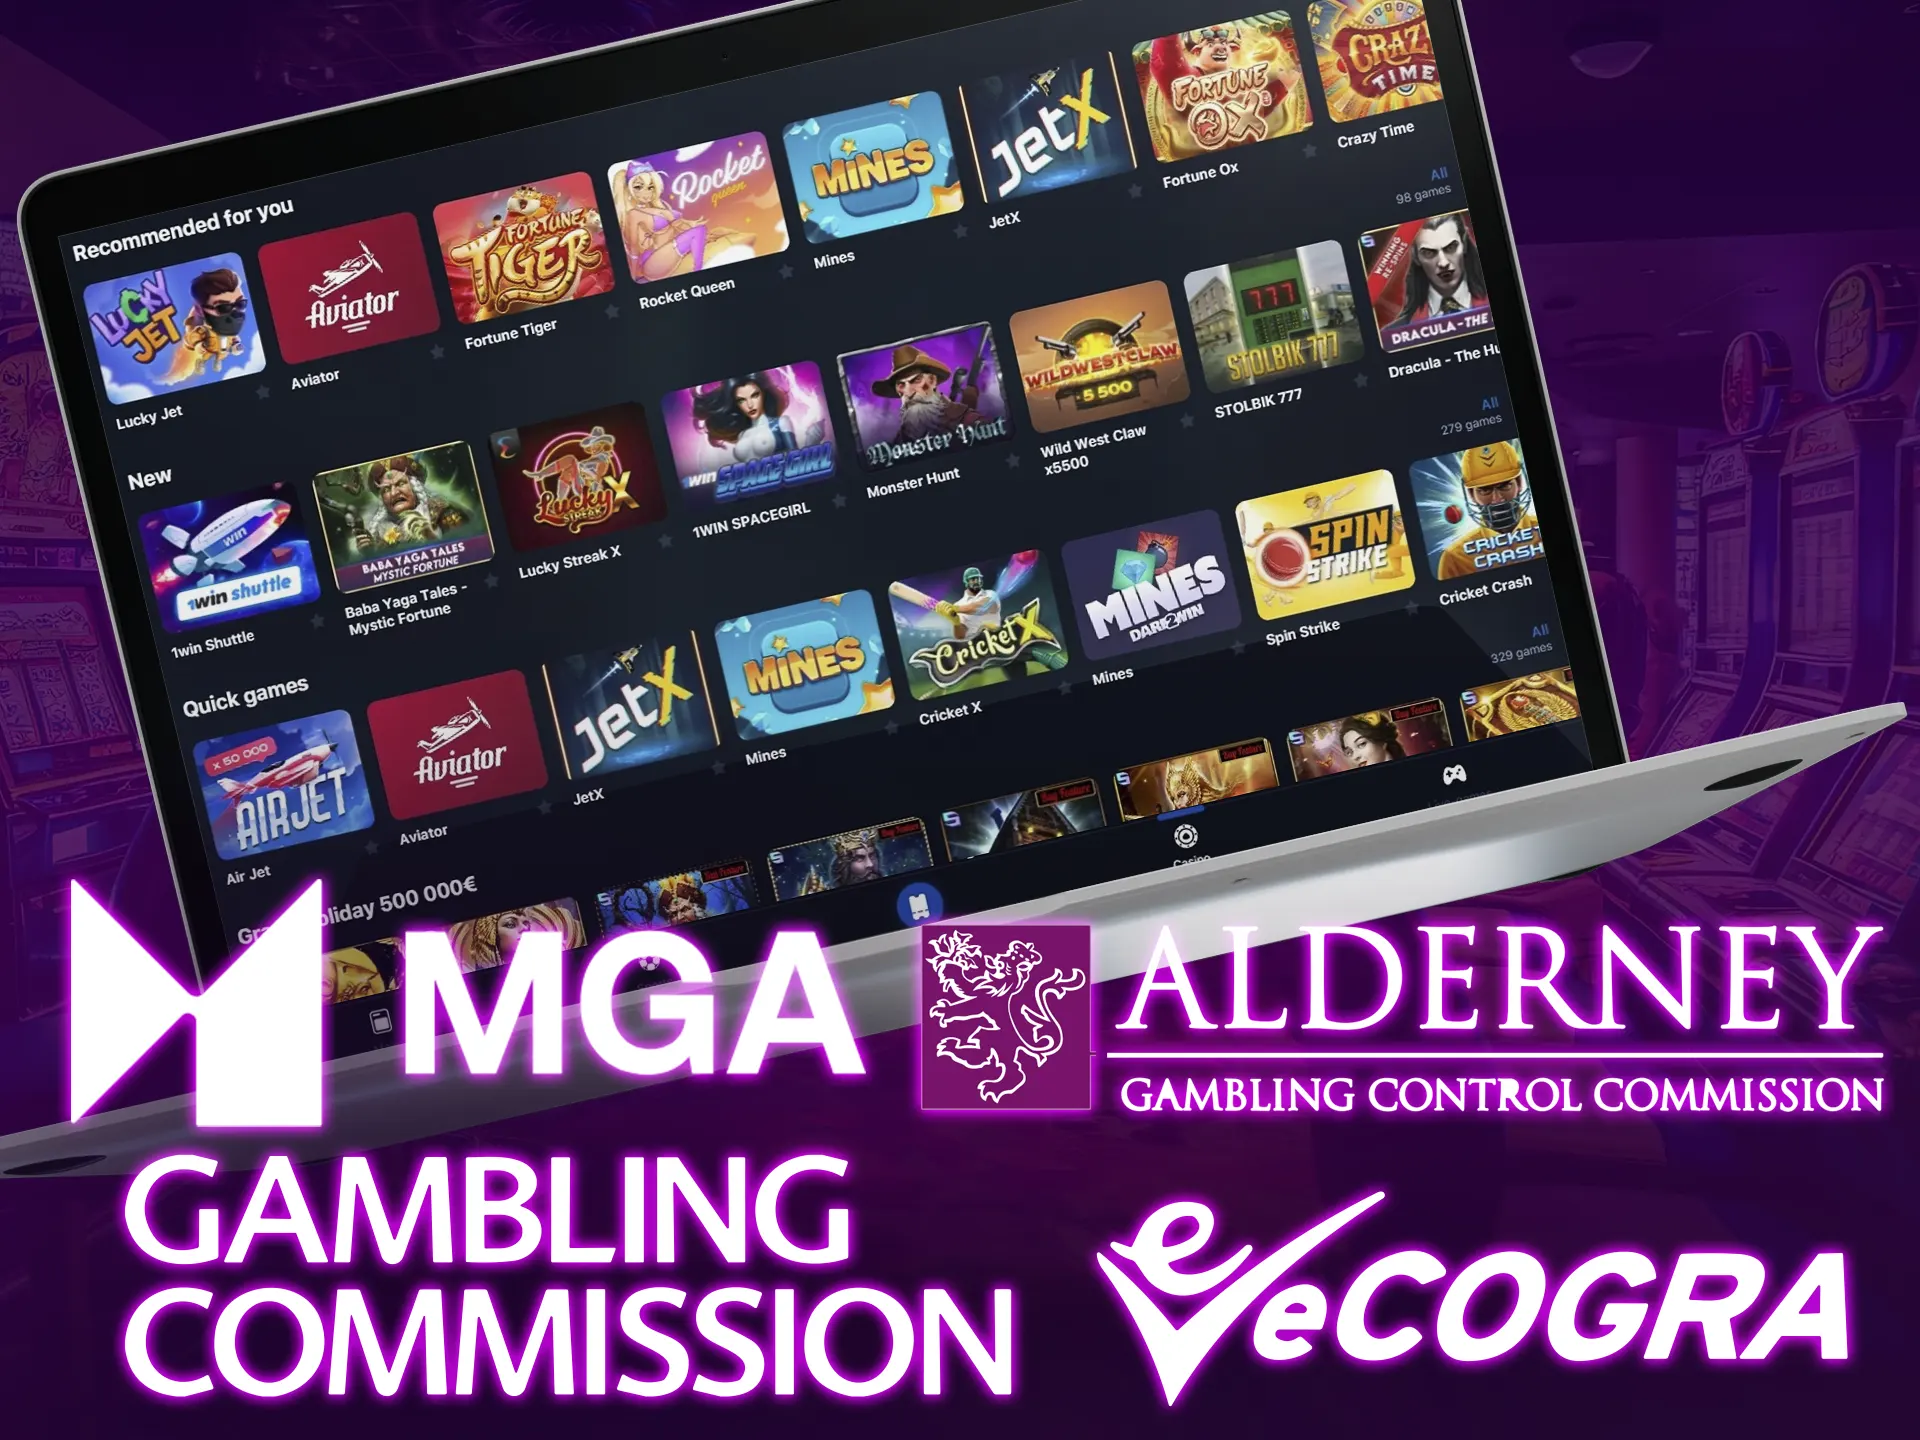 Find out more about security and legality of the relax gaming provider.